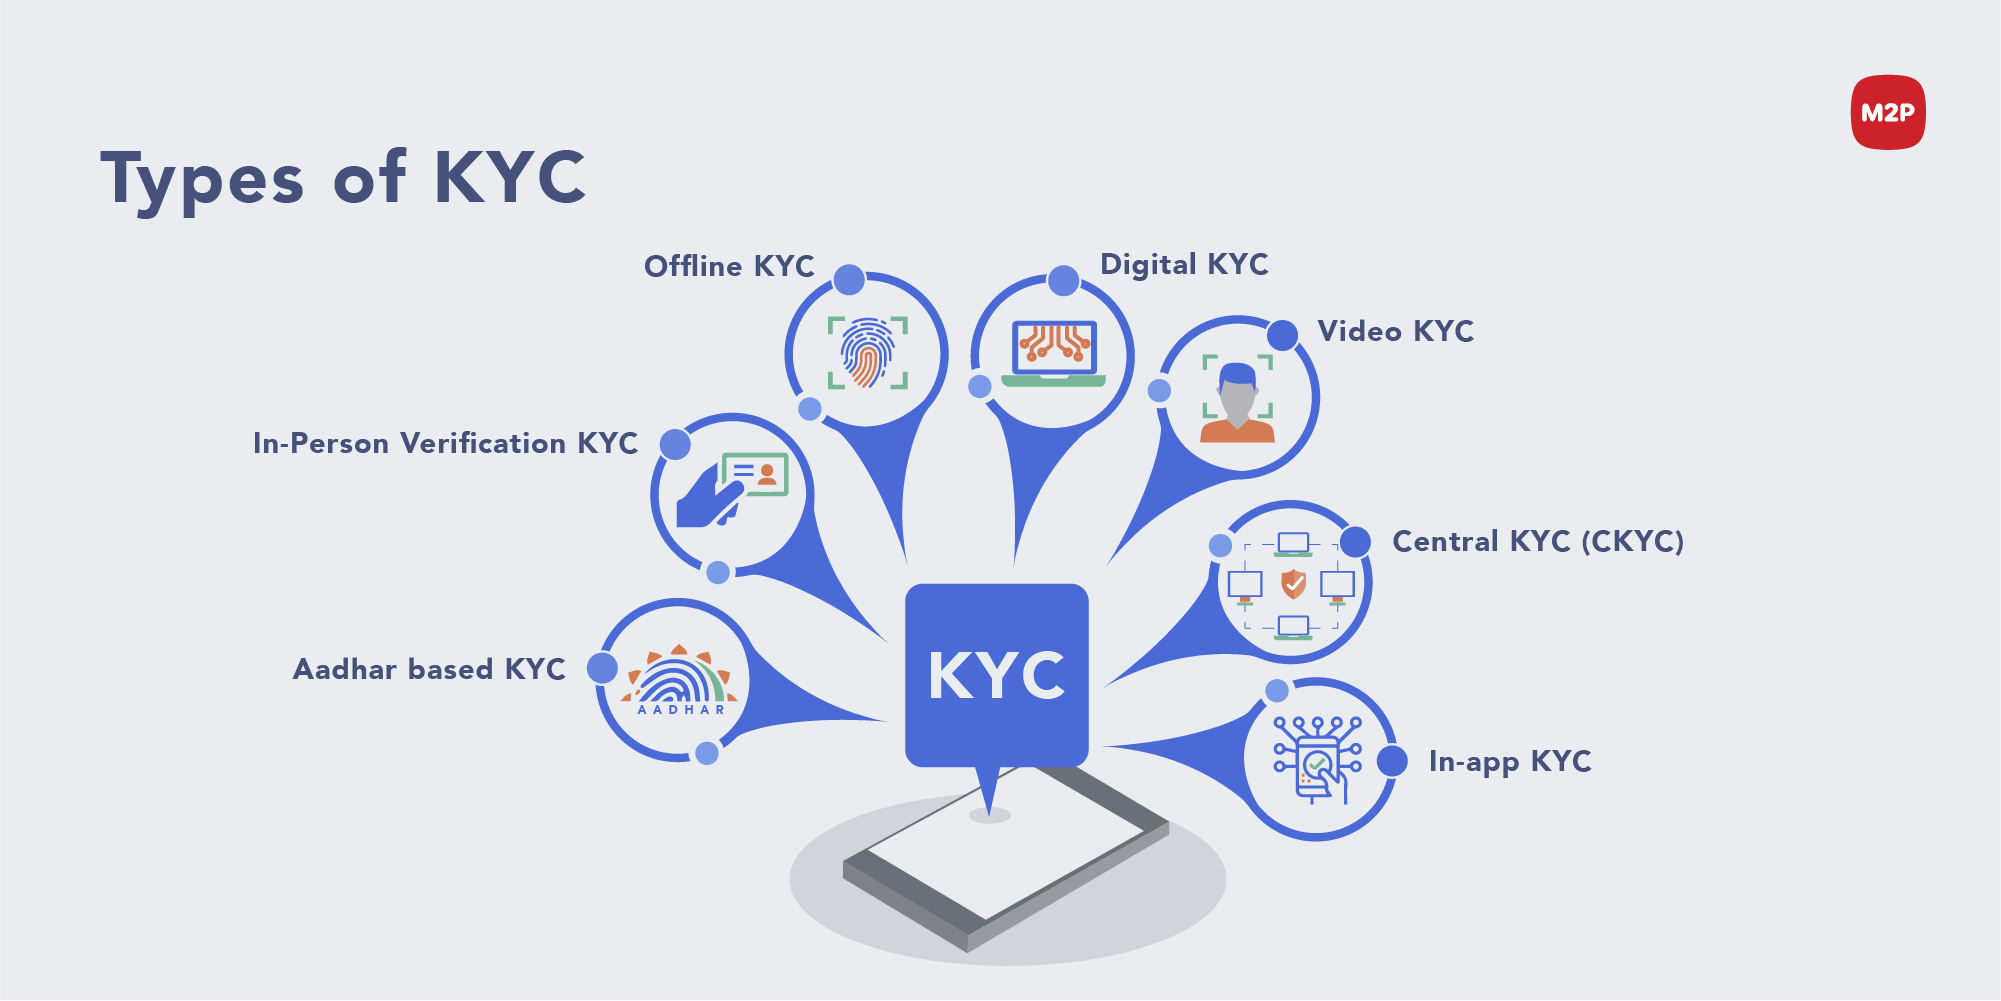 How can I start my KYC? – India Help Center